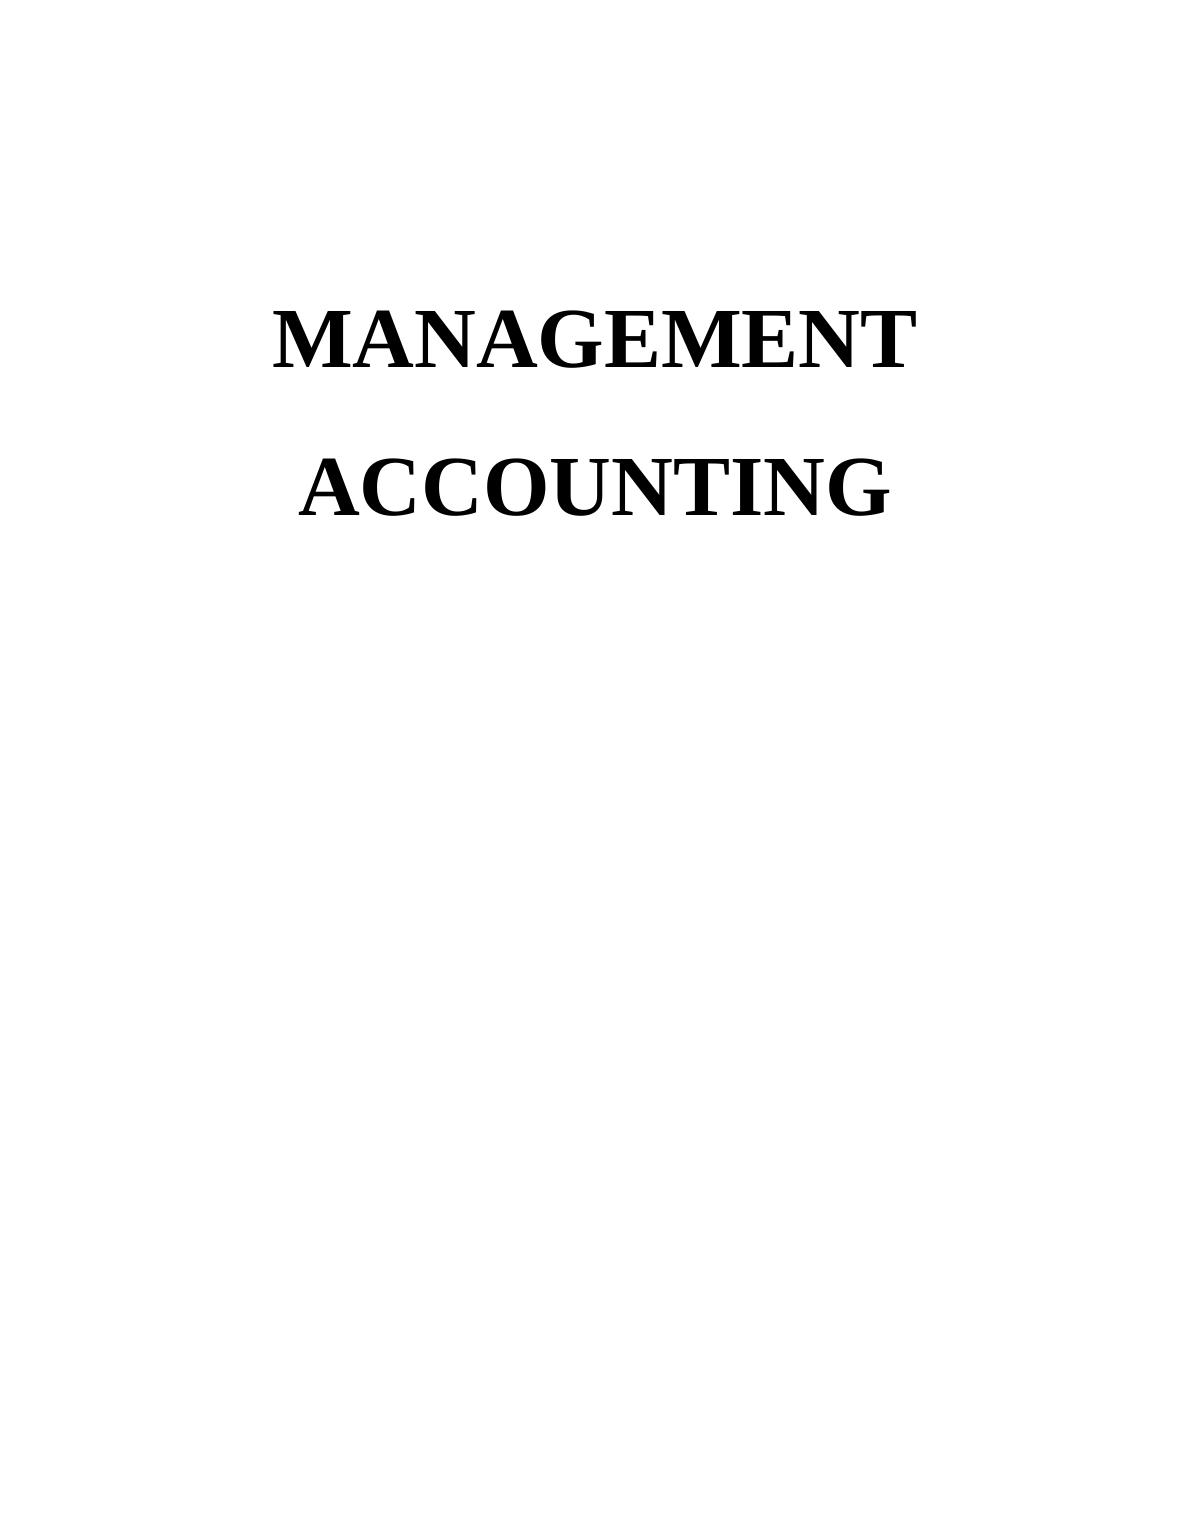 Management  Accounting - Sample Assignment_1